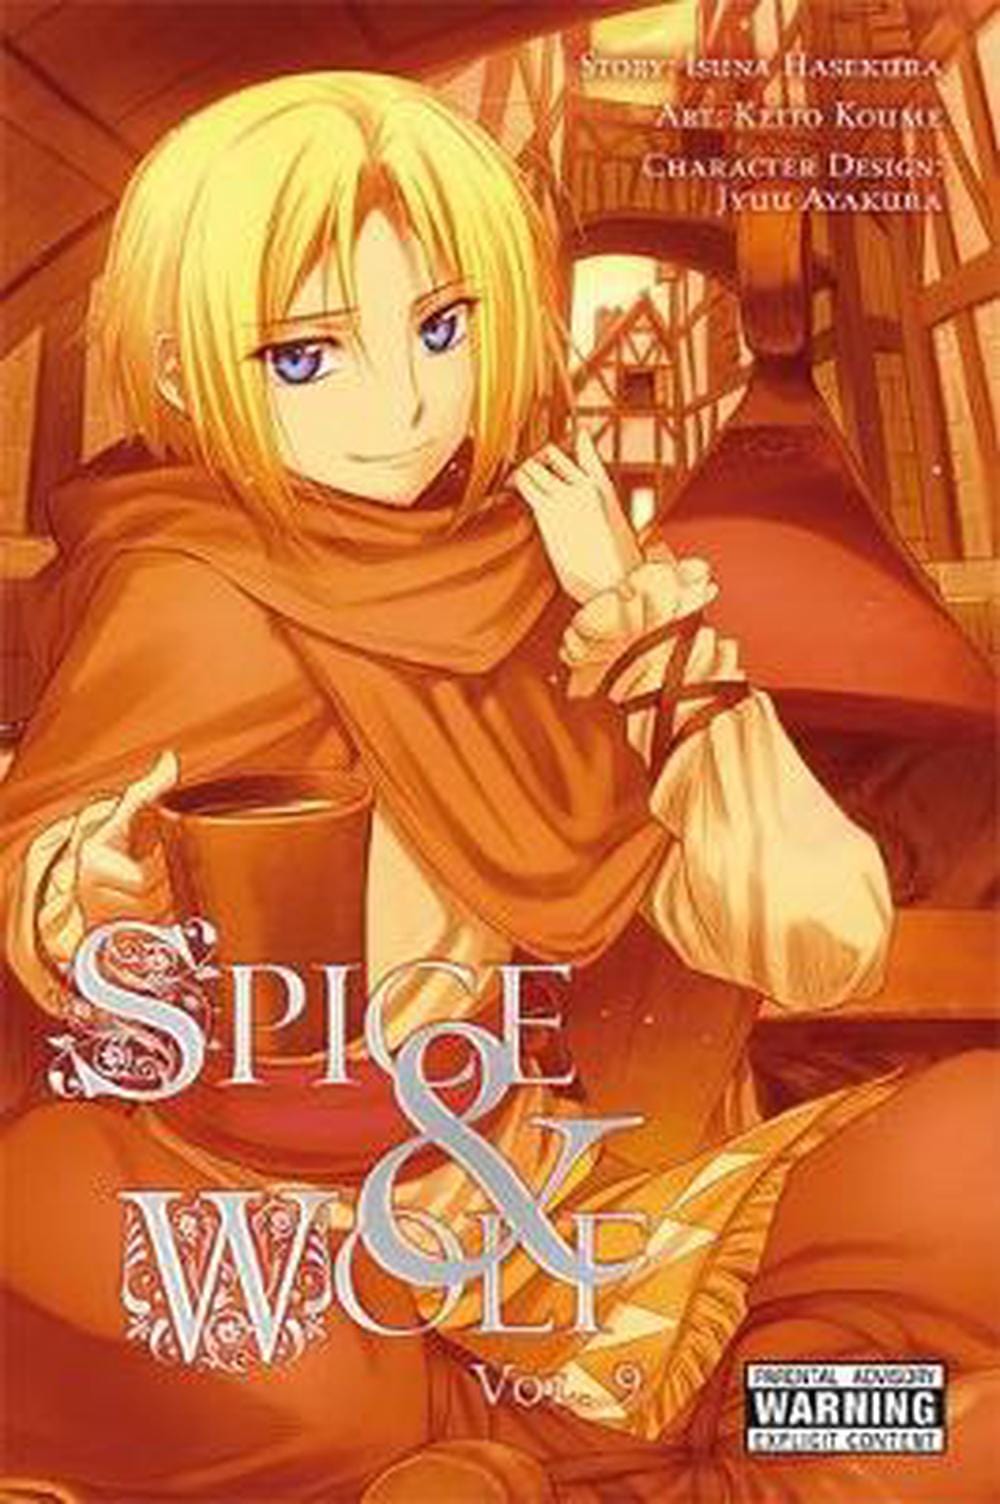 Spice and Wolf Vol. 9 - Third Eye